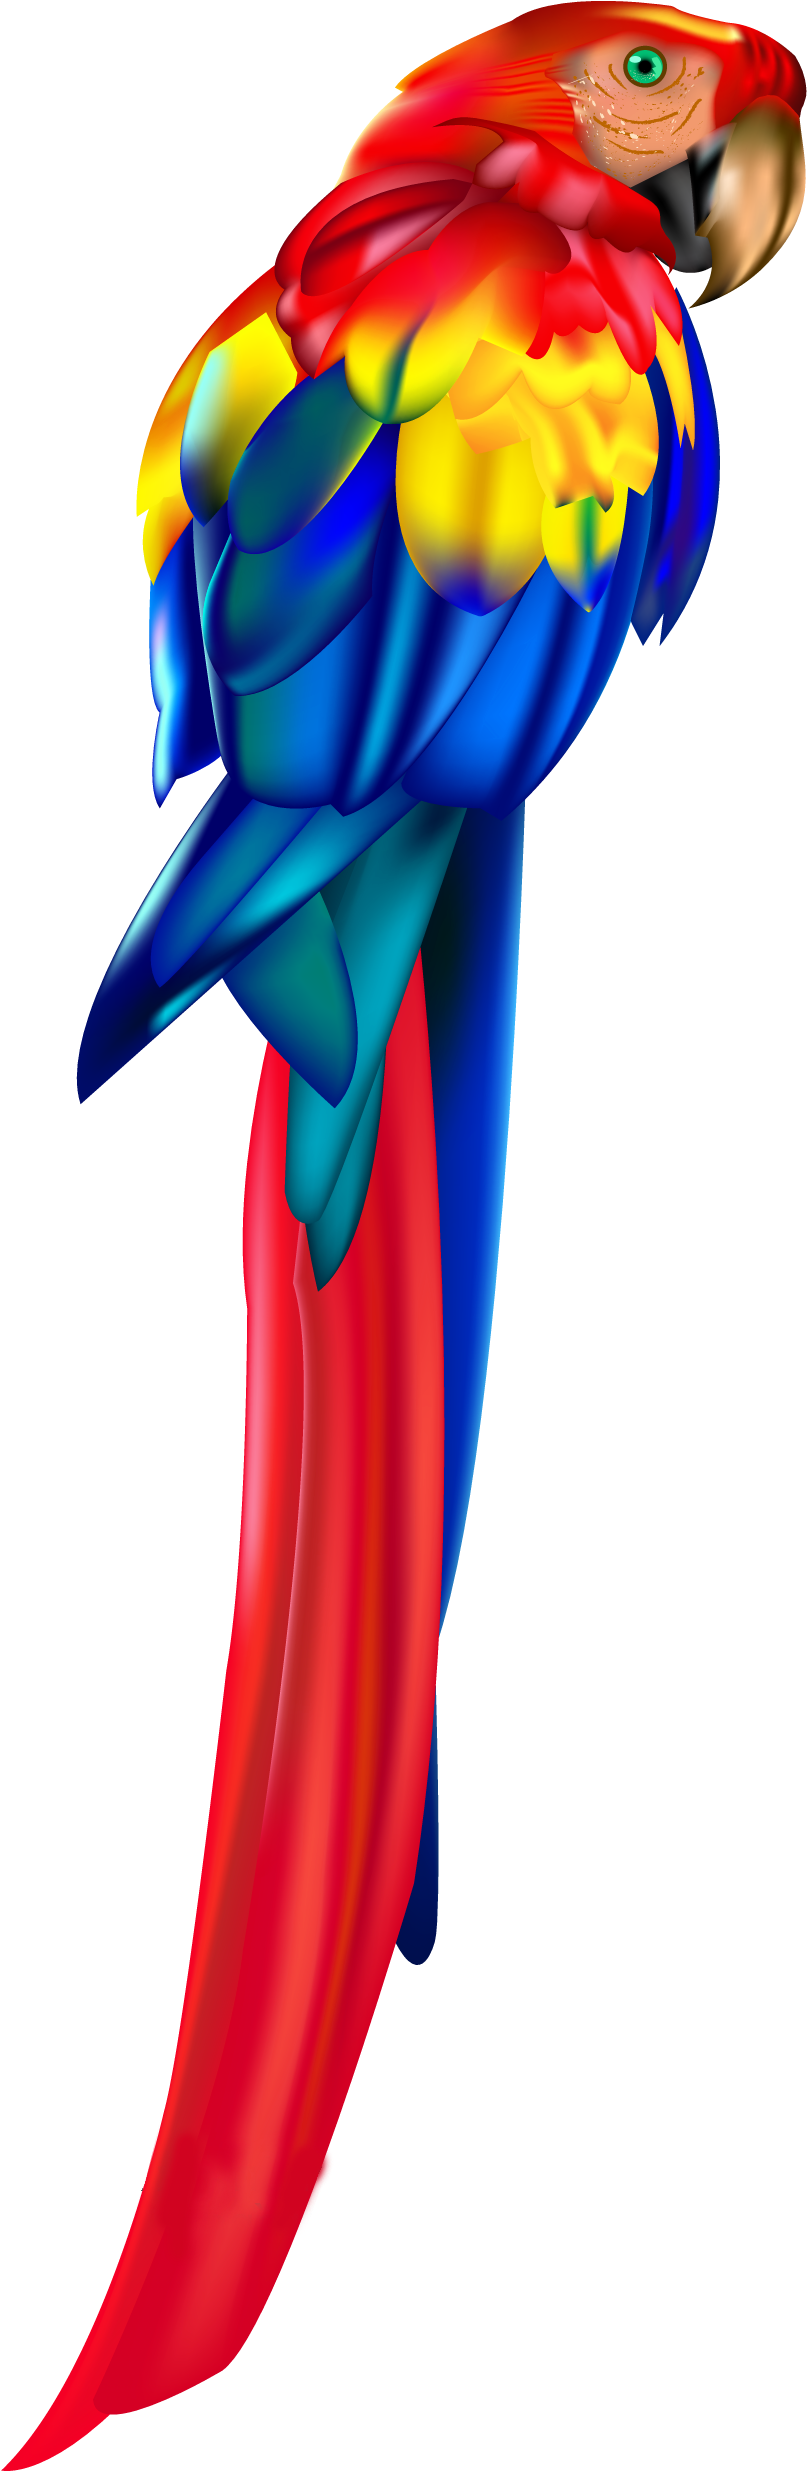 Colorful Macaw Parrot Profile PNG image